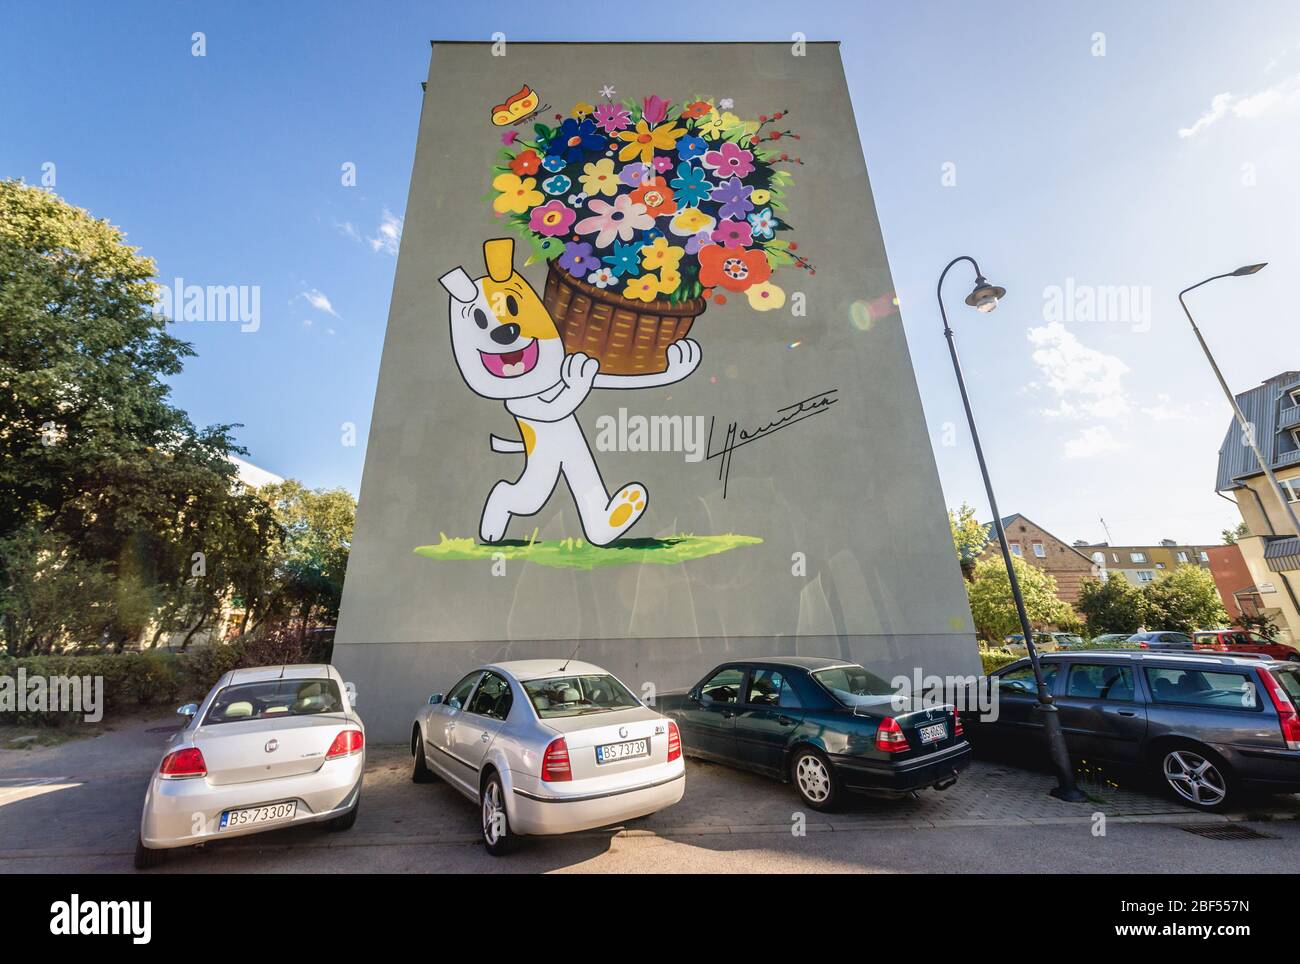 Reksio Polish cartoon character painting on a residential building wall in Suwalki city, located in Podlaskie Voivodeship of northeastern Poland Stock Photo